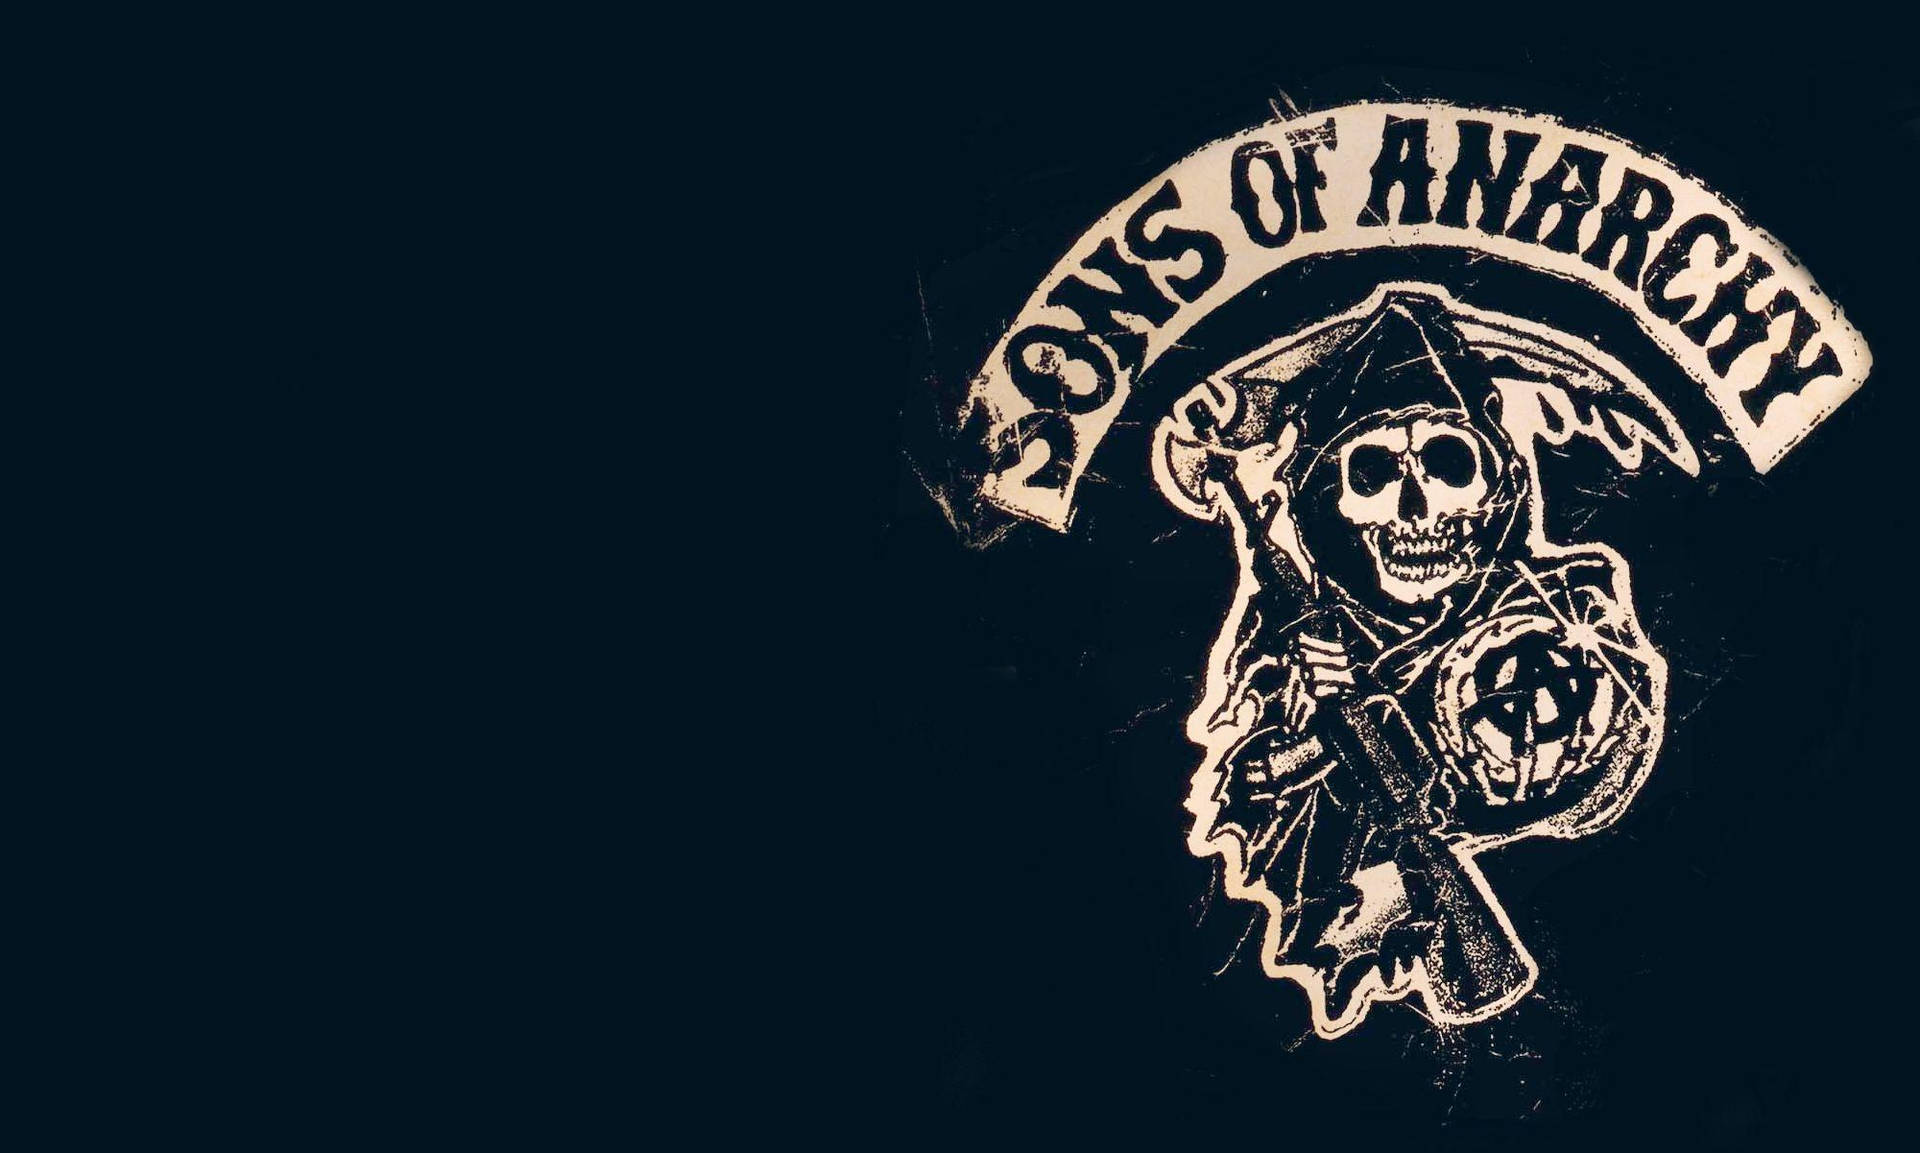 The Burgeoning Idealism Of Sons Of Anarchy